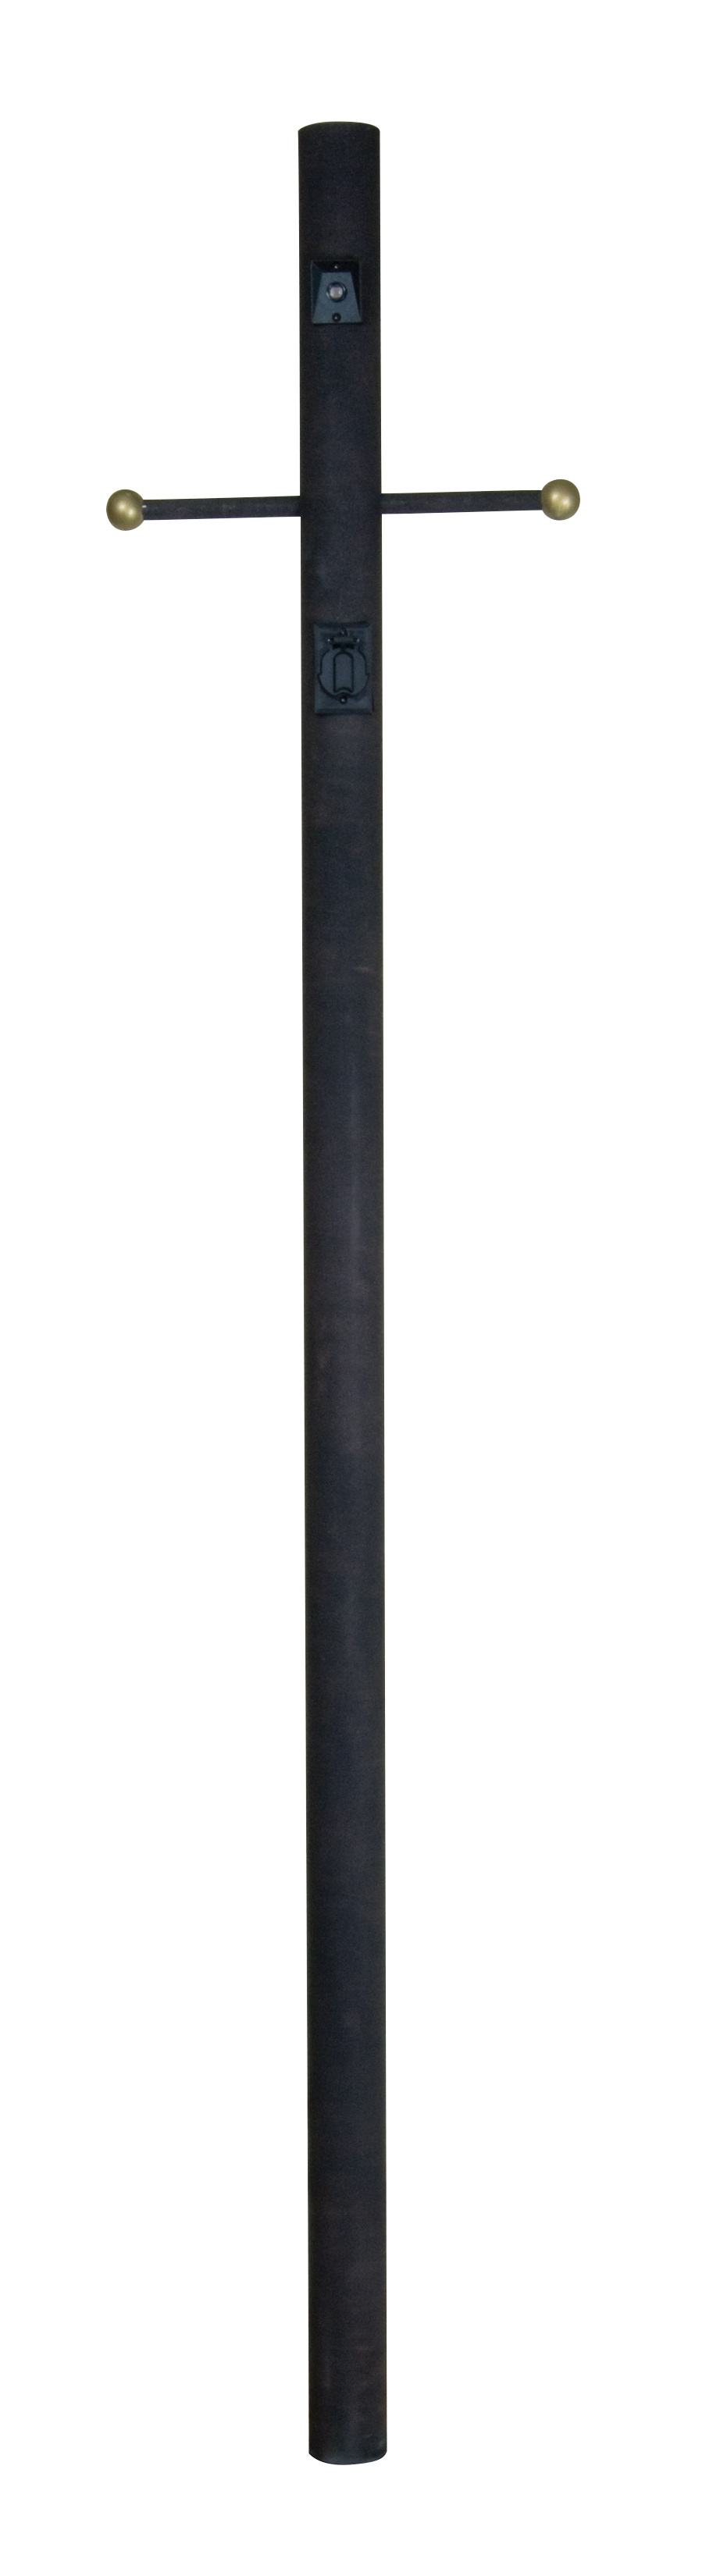 84" Smooth Direct Burial Post w/ Photocell & Convenience Outlet in Textured Black